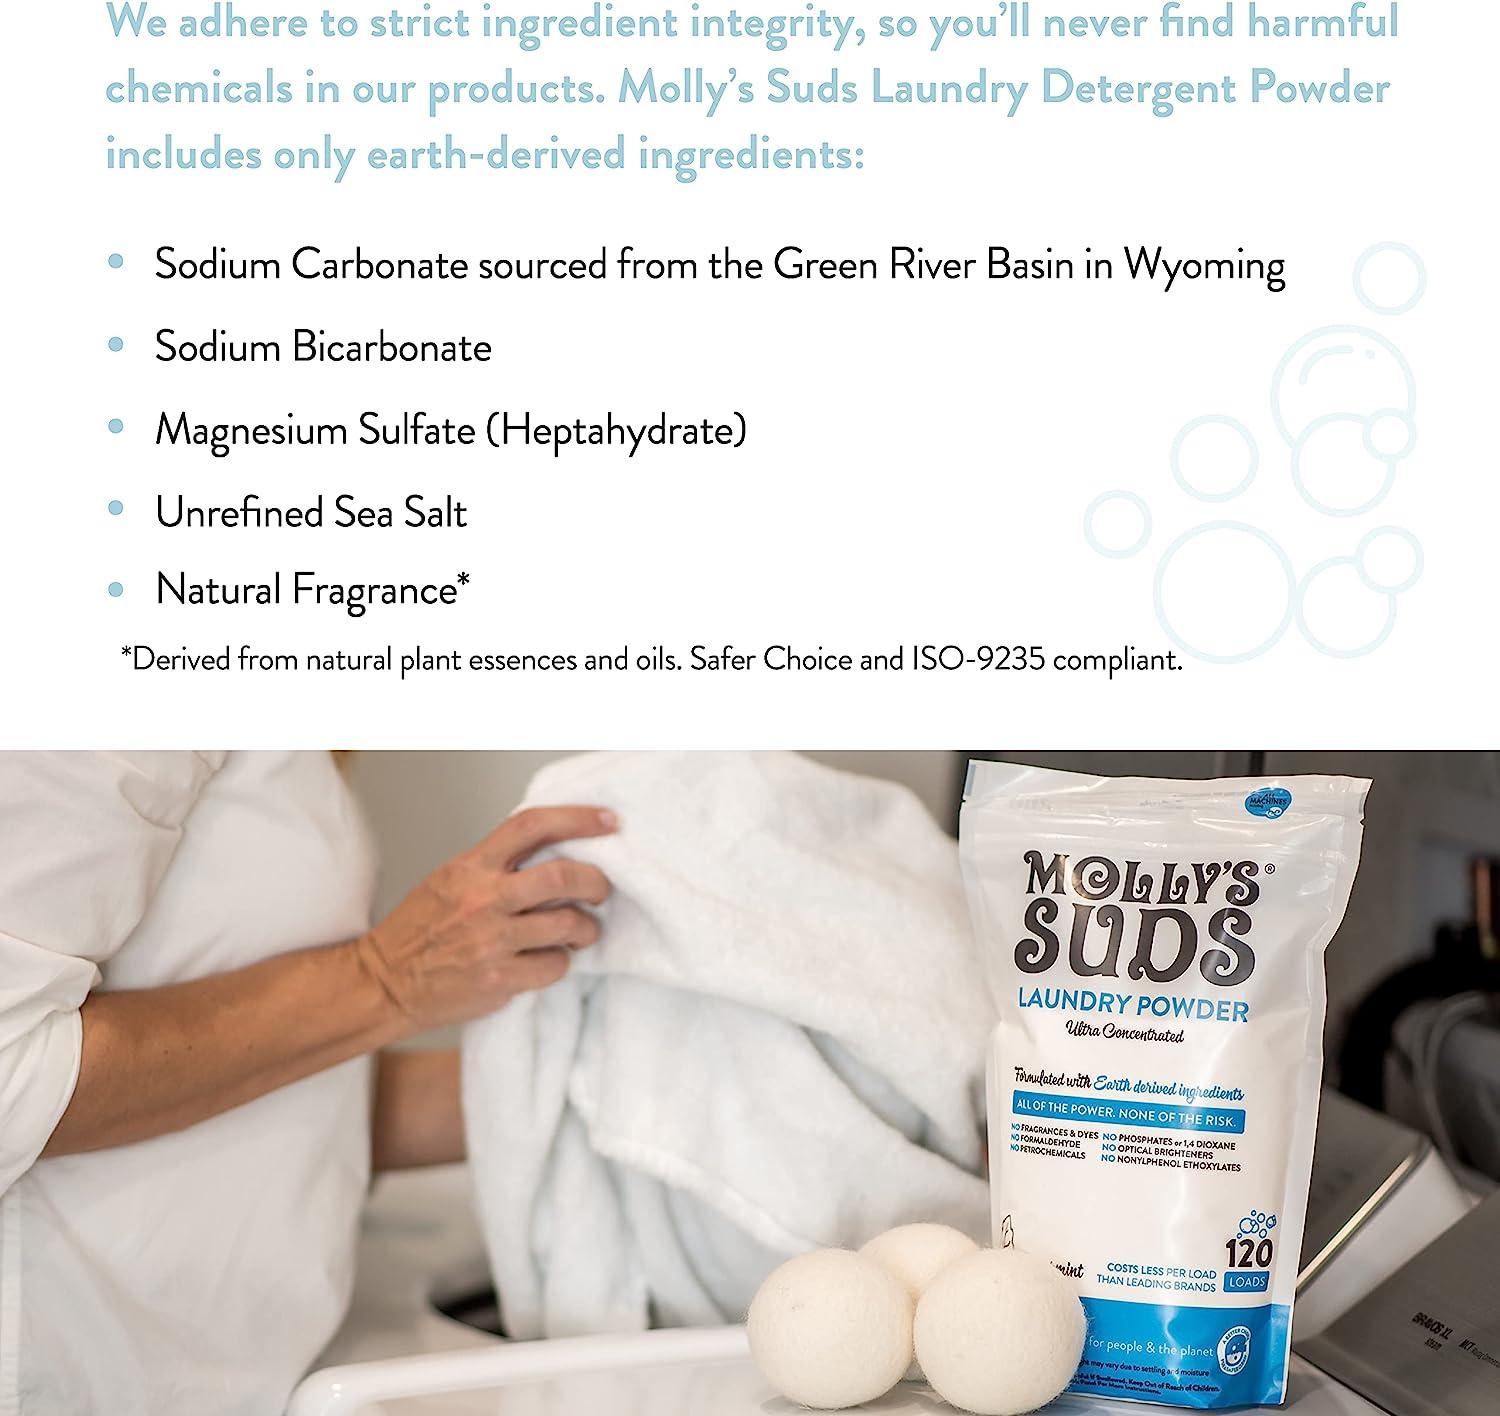 Review :: Molly's Suds Laundry Powder – Safe Household Cleaning